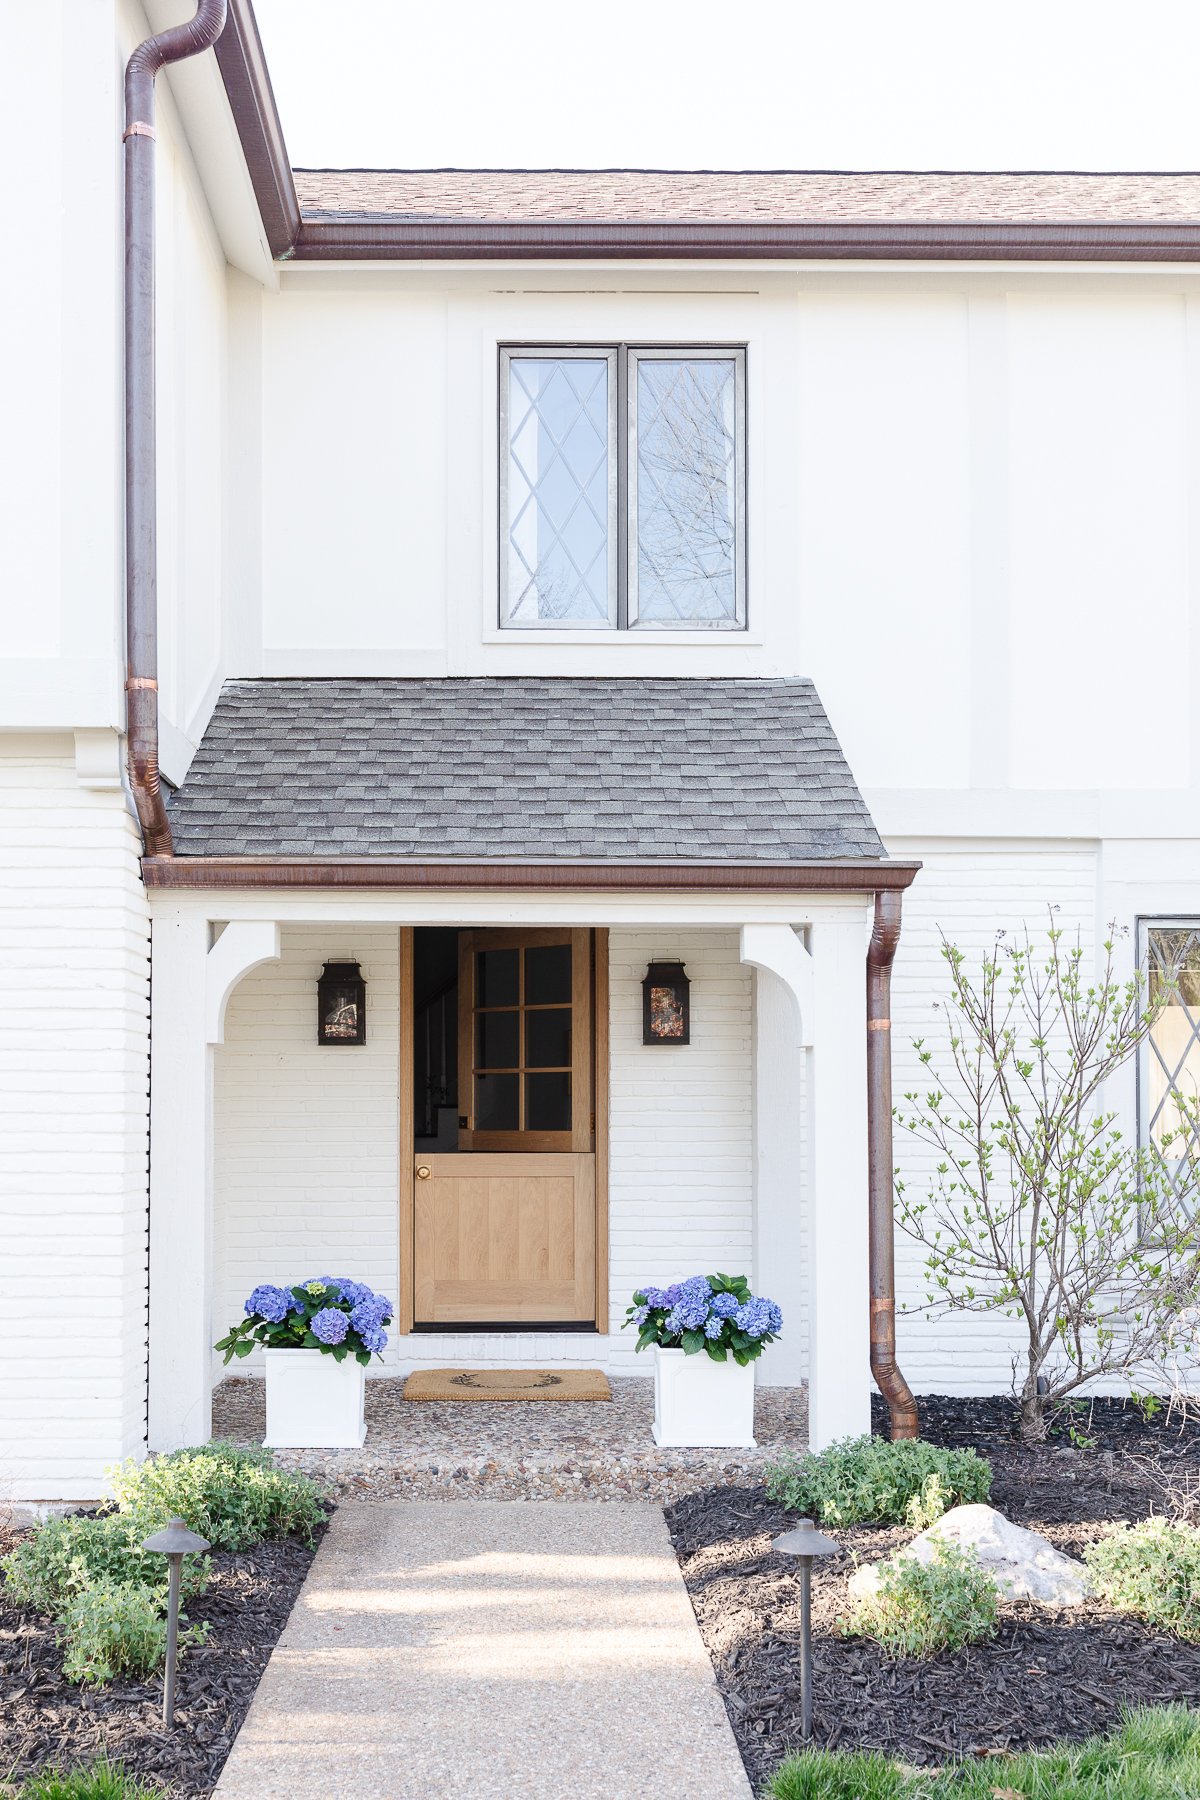 The entry of a white painted home with copper gutters, in a guide to How to Sell a House Fast.